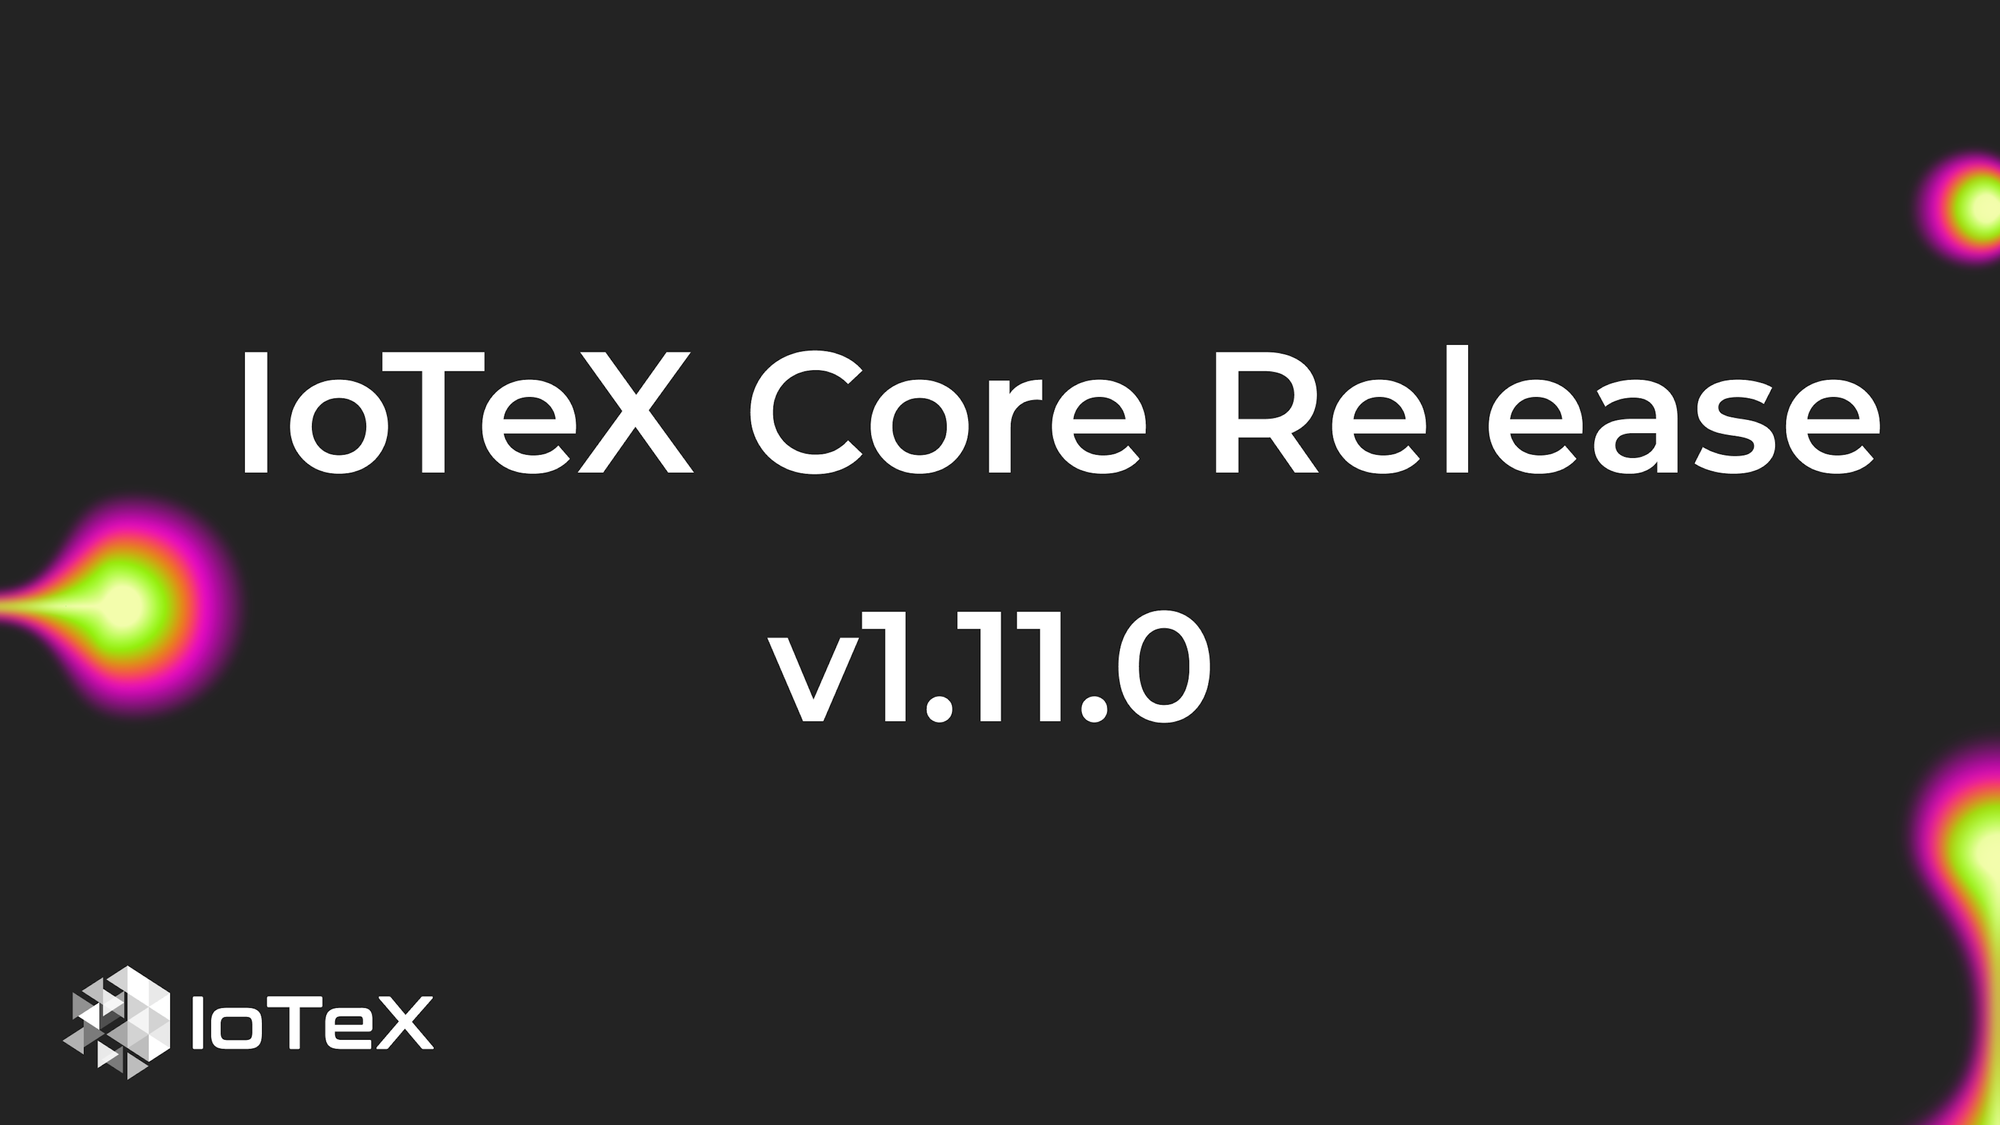 IoTeX Core 1.11.0: A Significant Leap Forward